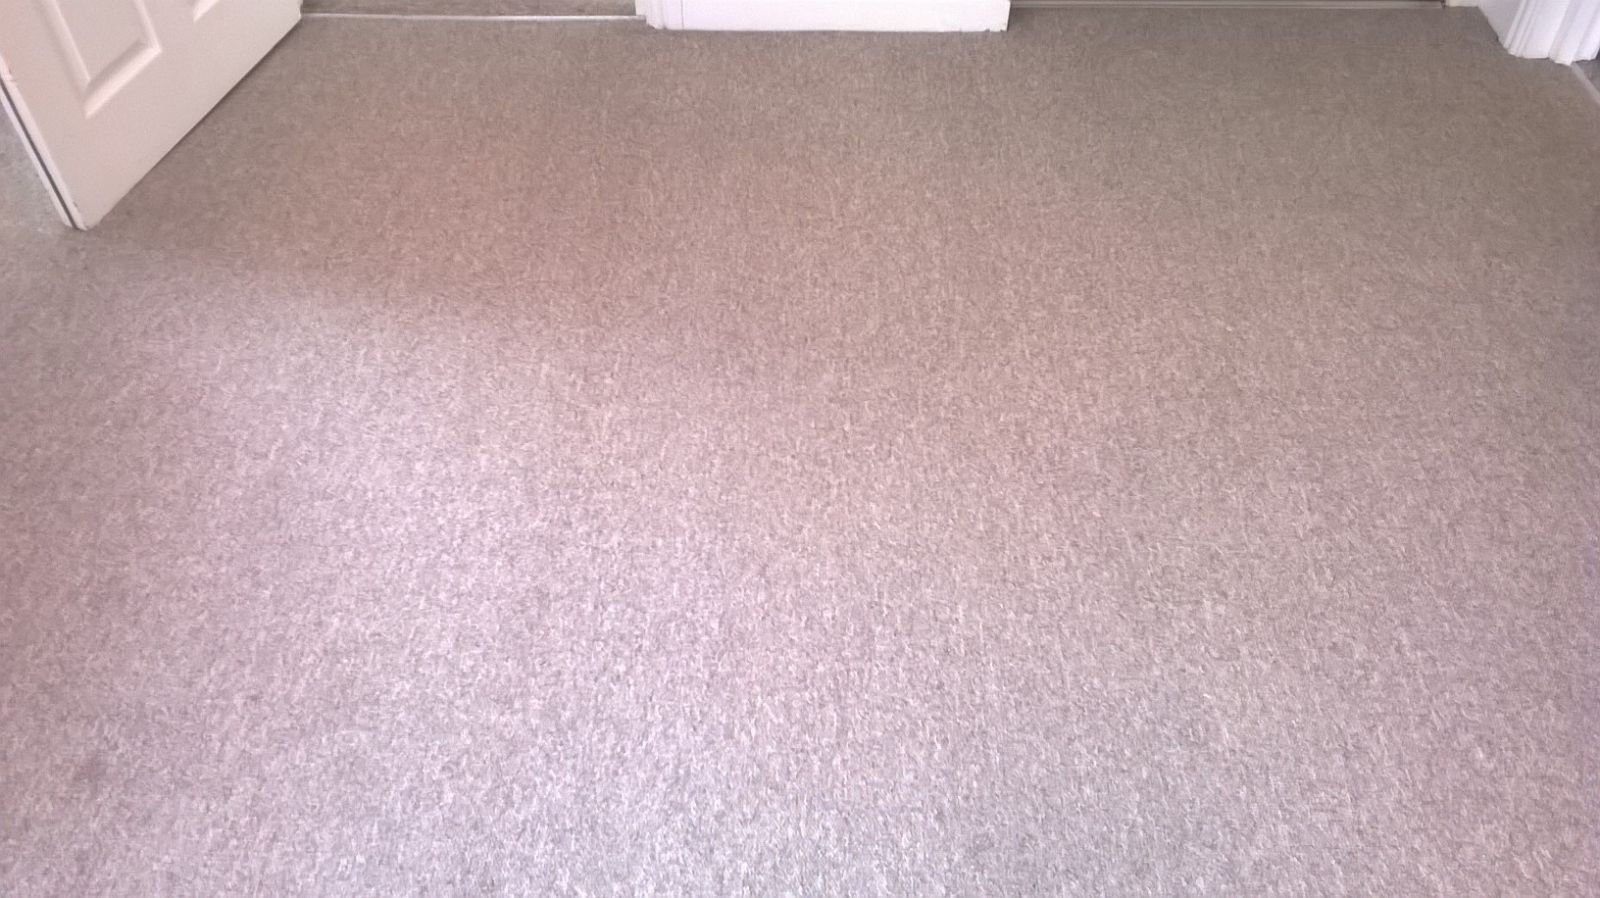 Carpet after LDM Services had cleaned it 